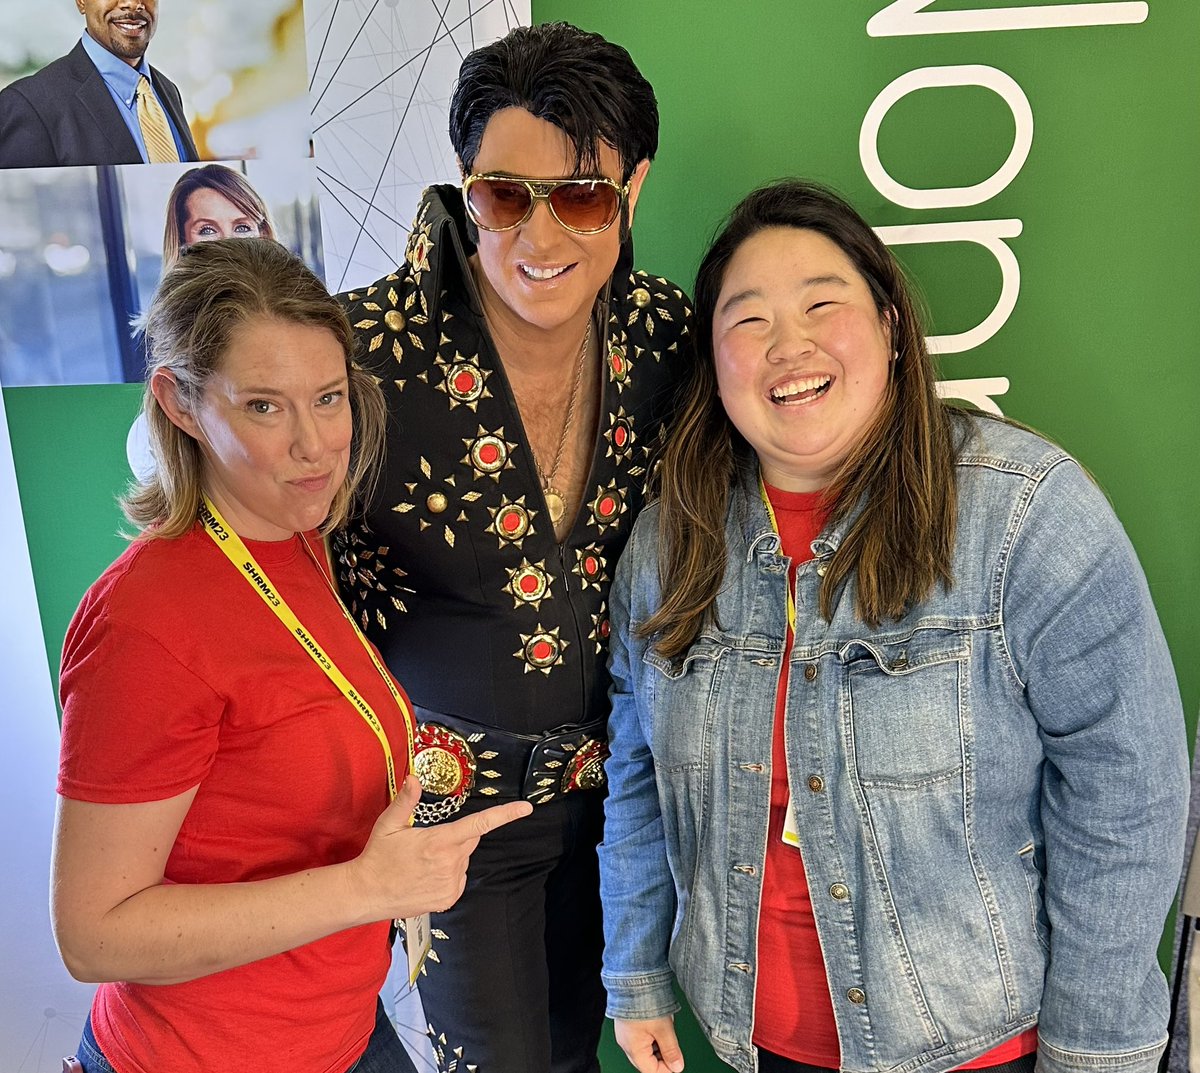 Great start to #SHRM23 viva Las Vegas style with an Elvis impersonator! AARP is here to drive change with free #caregiving resources